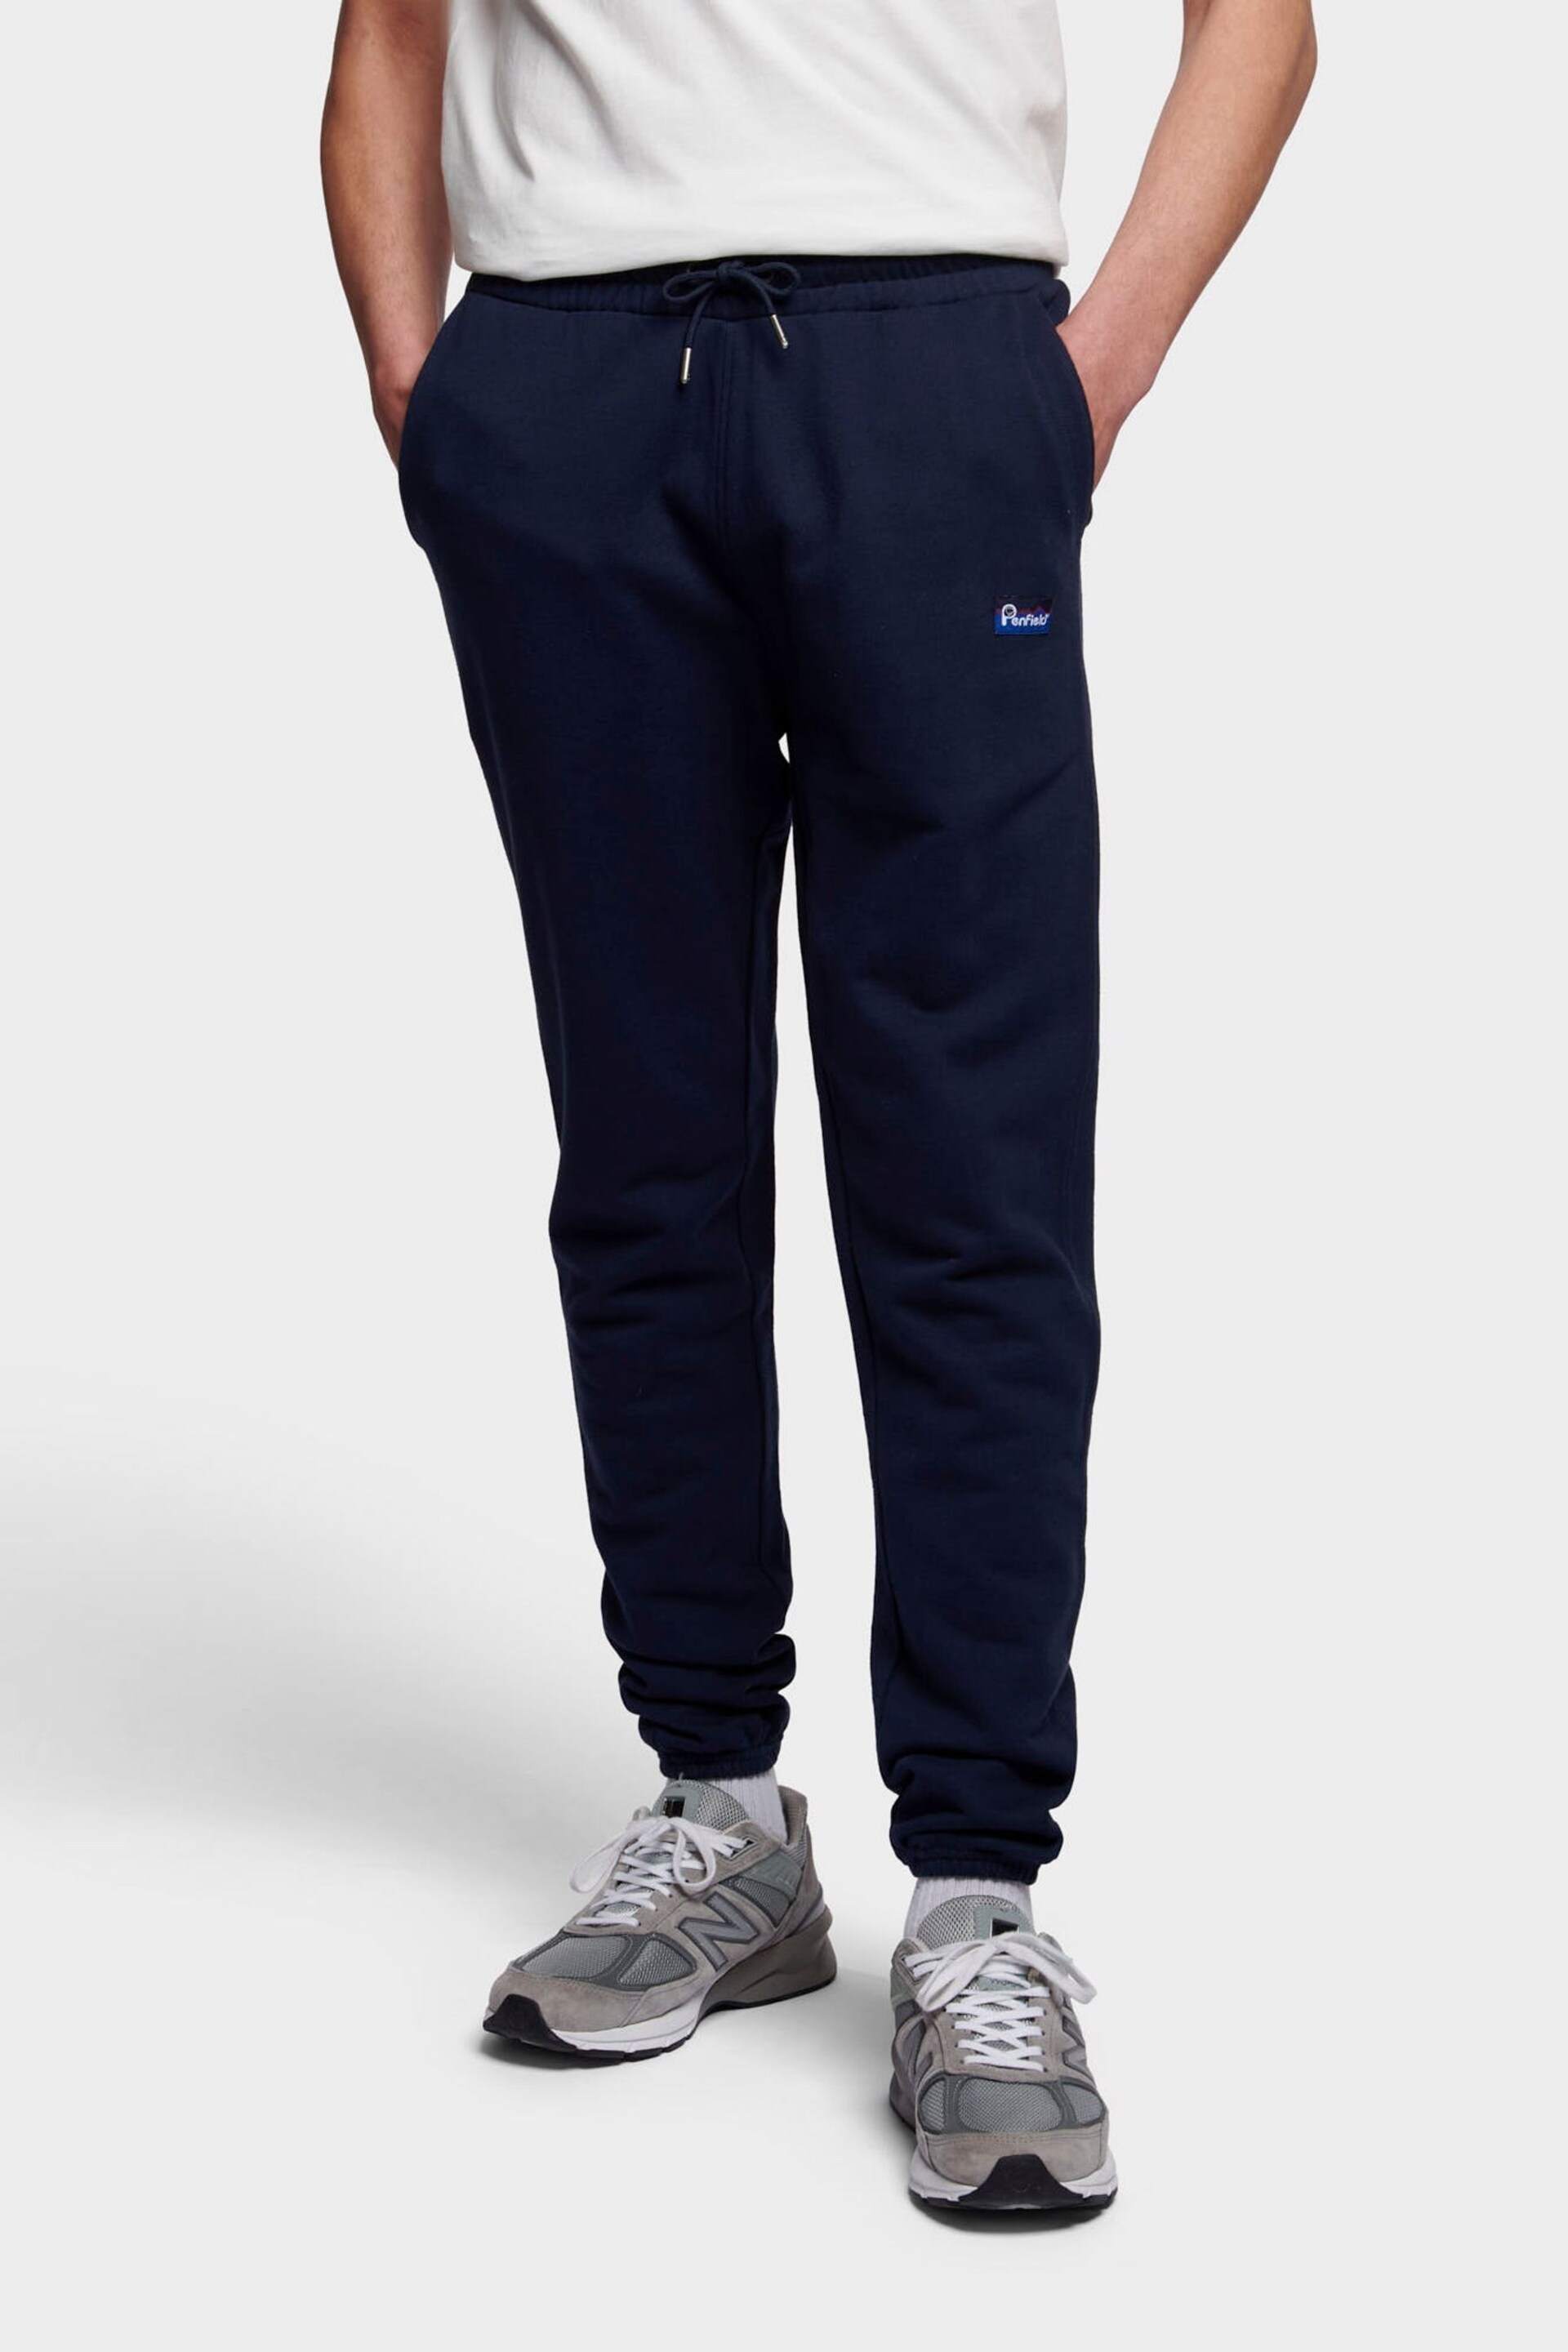 Penfield Mens Relaxed Fit Original Logo Joggers - Image 1 of 7